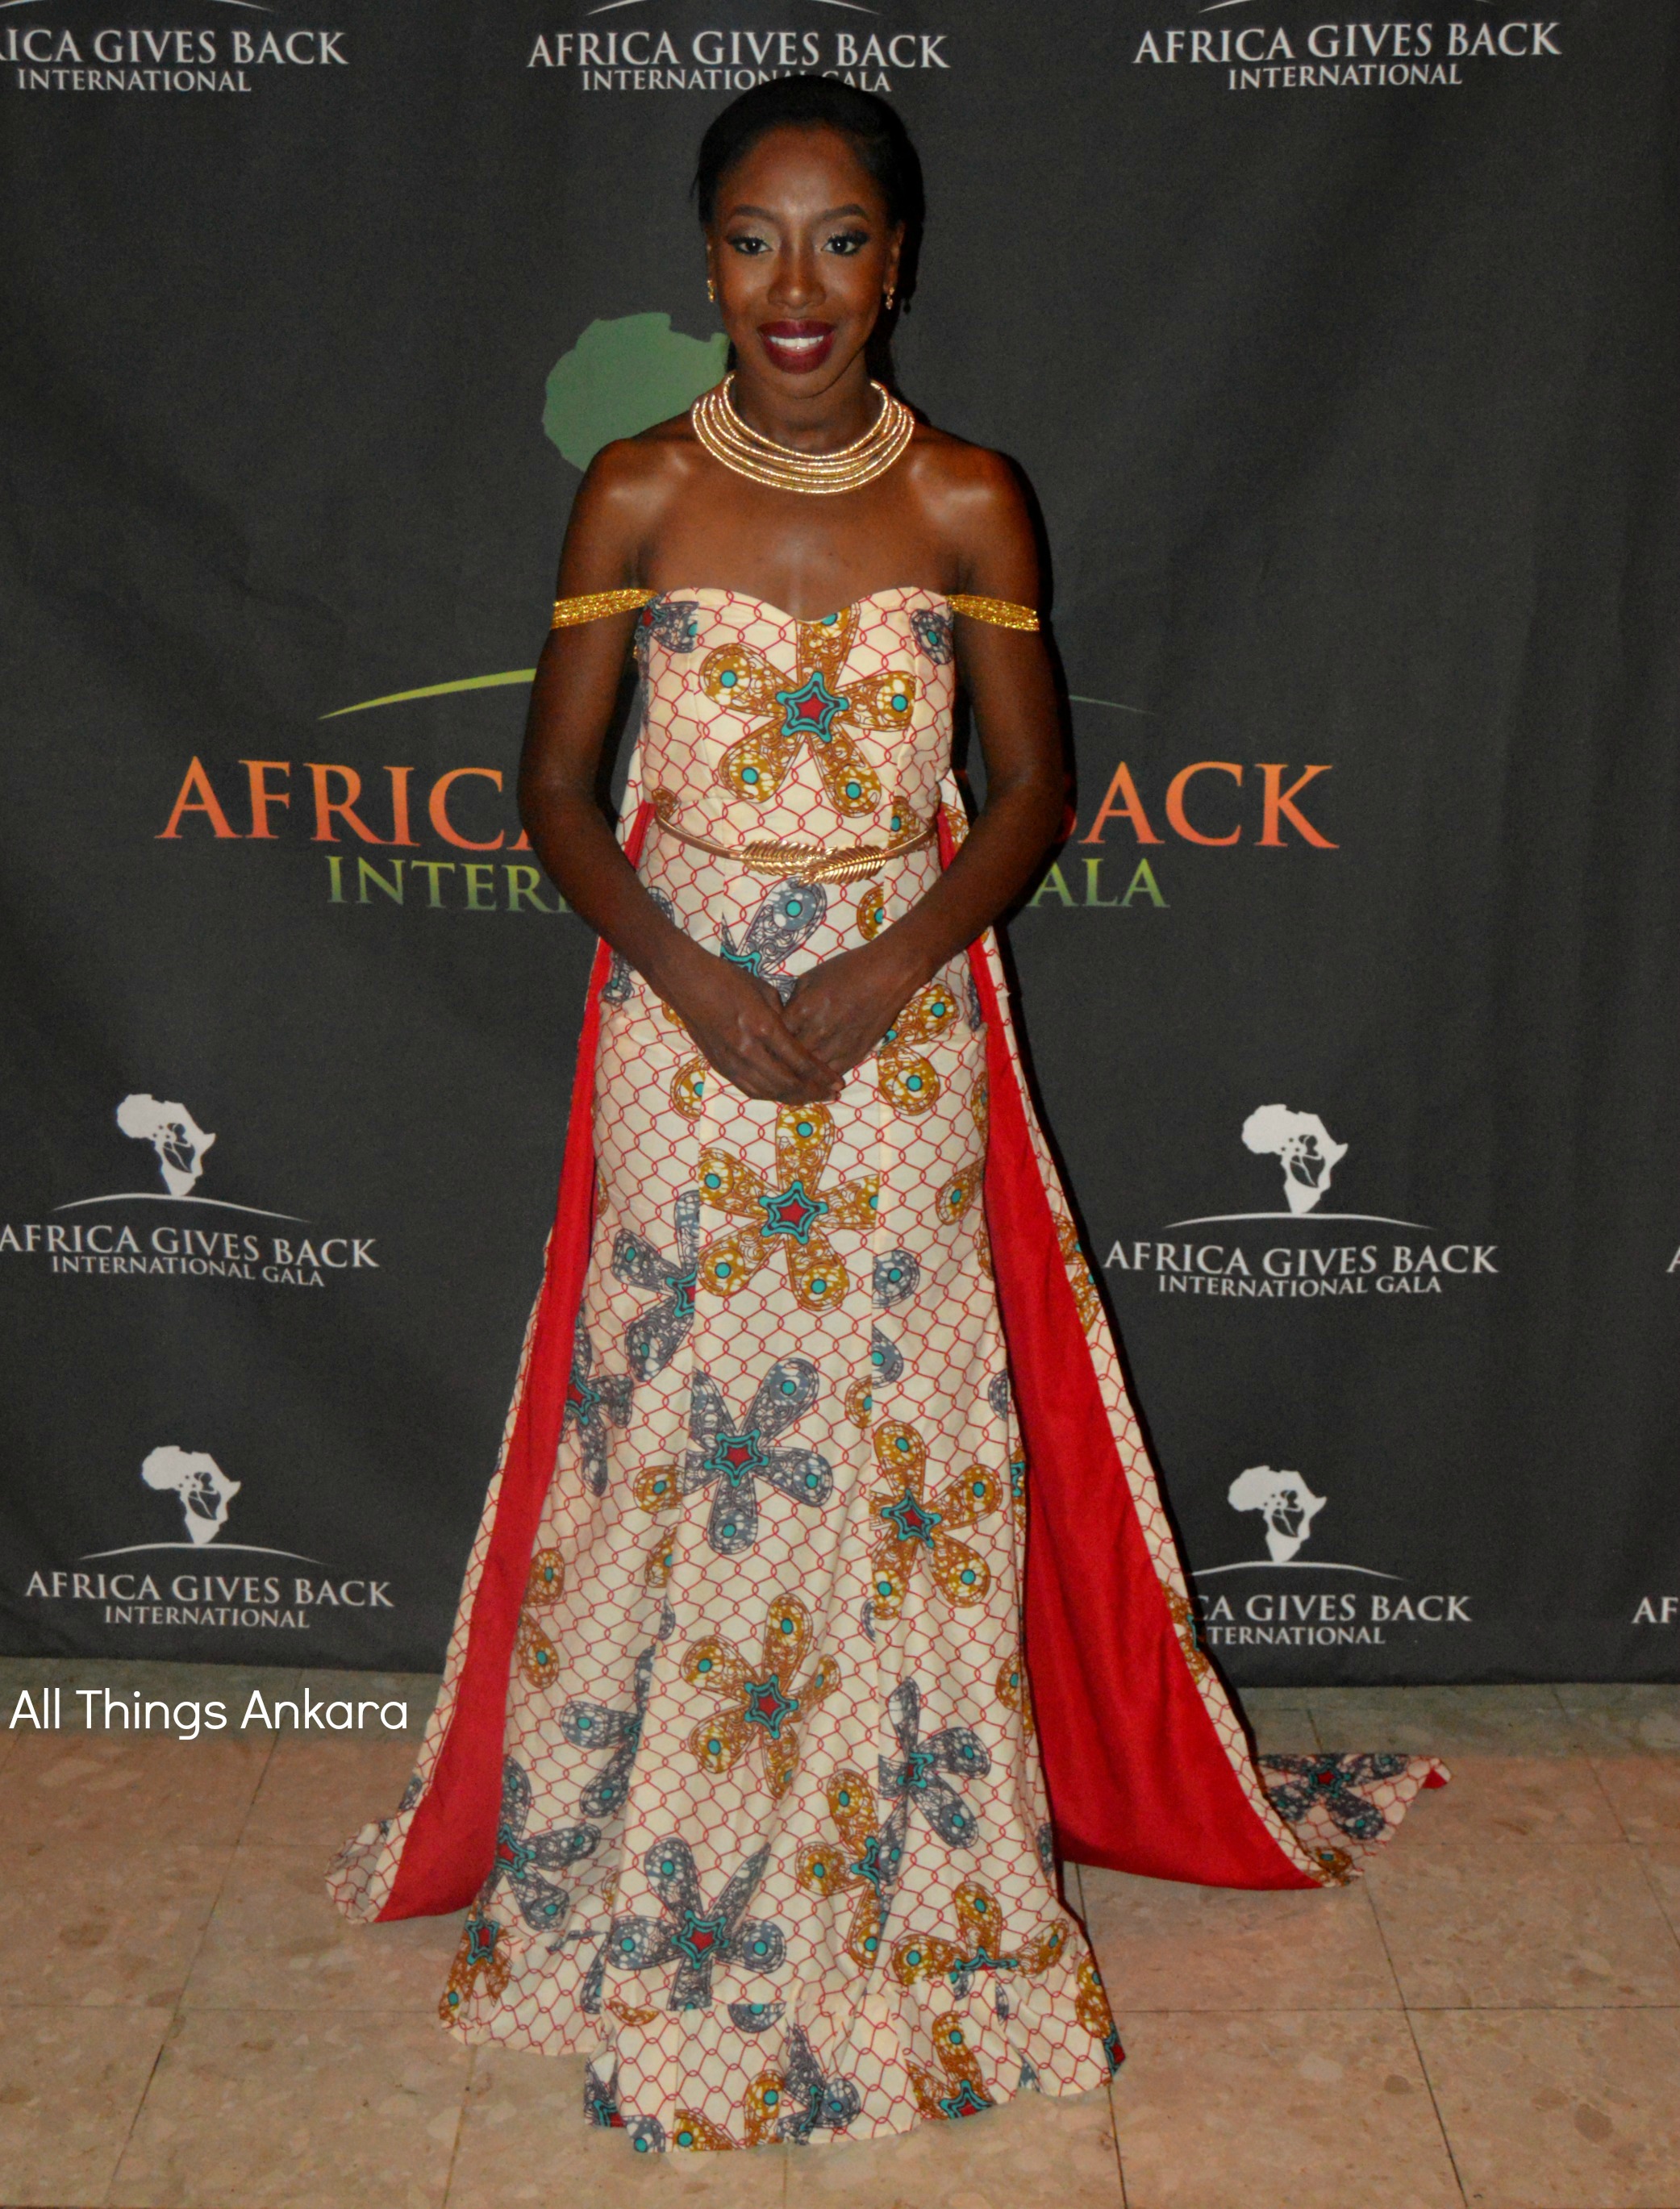 Gala-All Things Ankara's Best Dressed Women at Africa Gives Back International Gala 2016 12